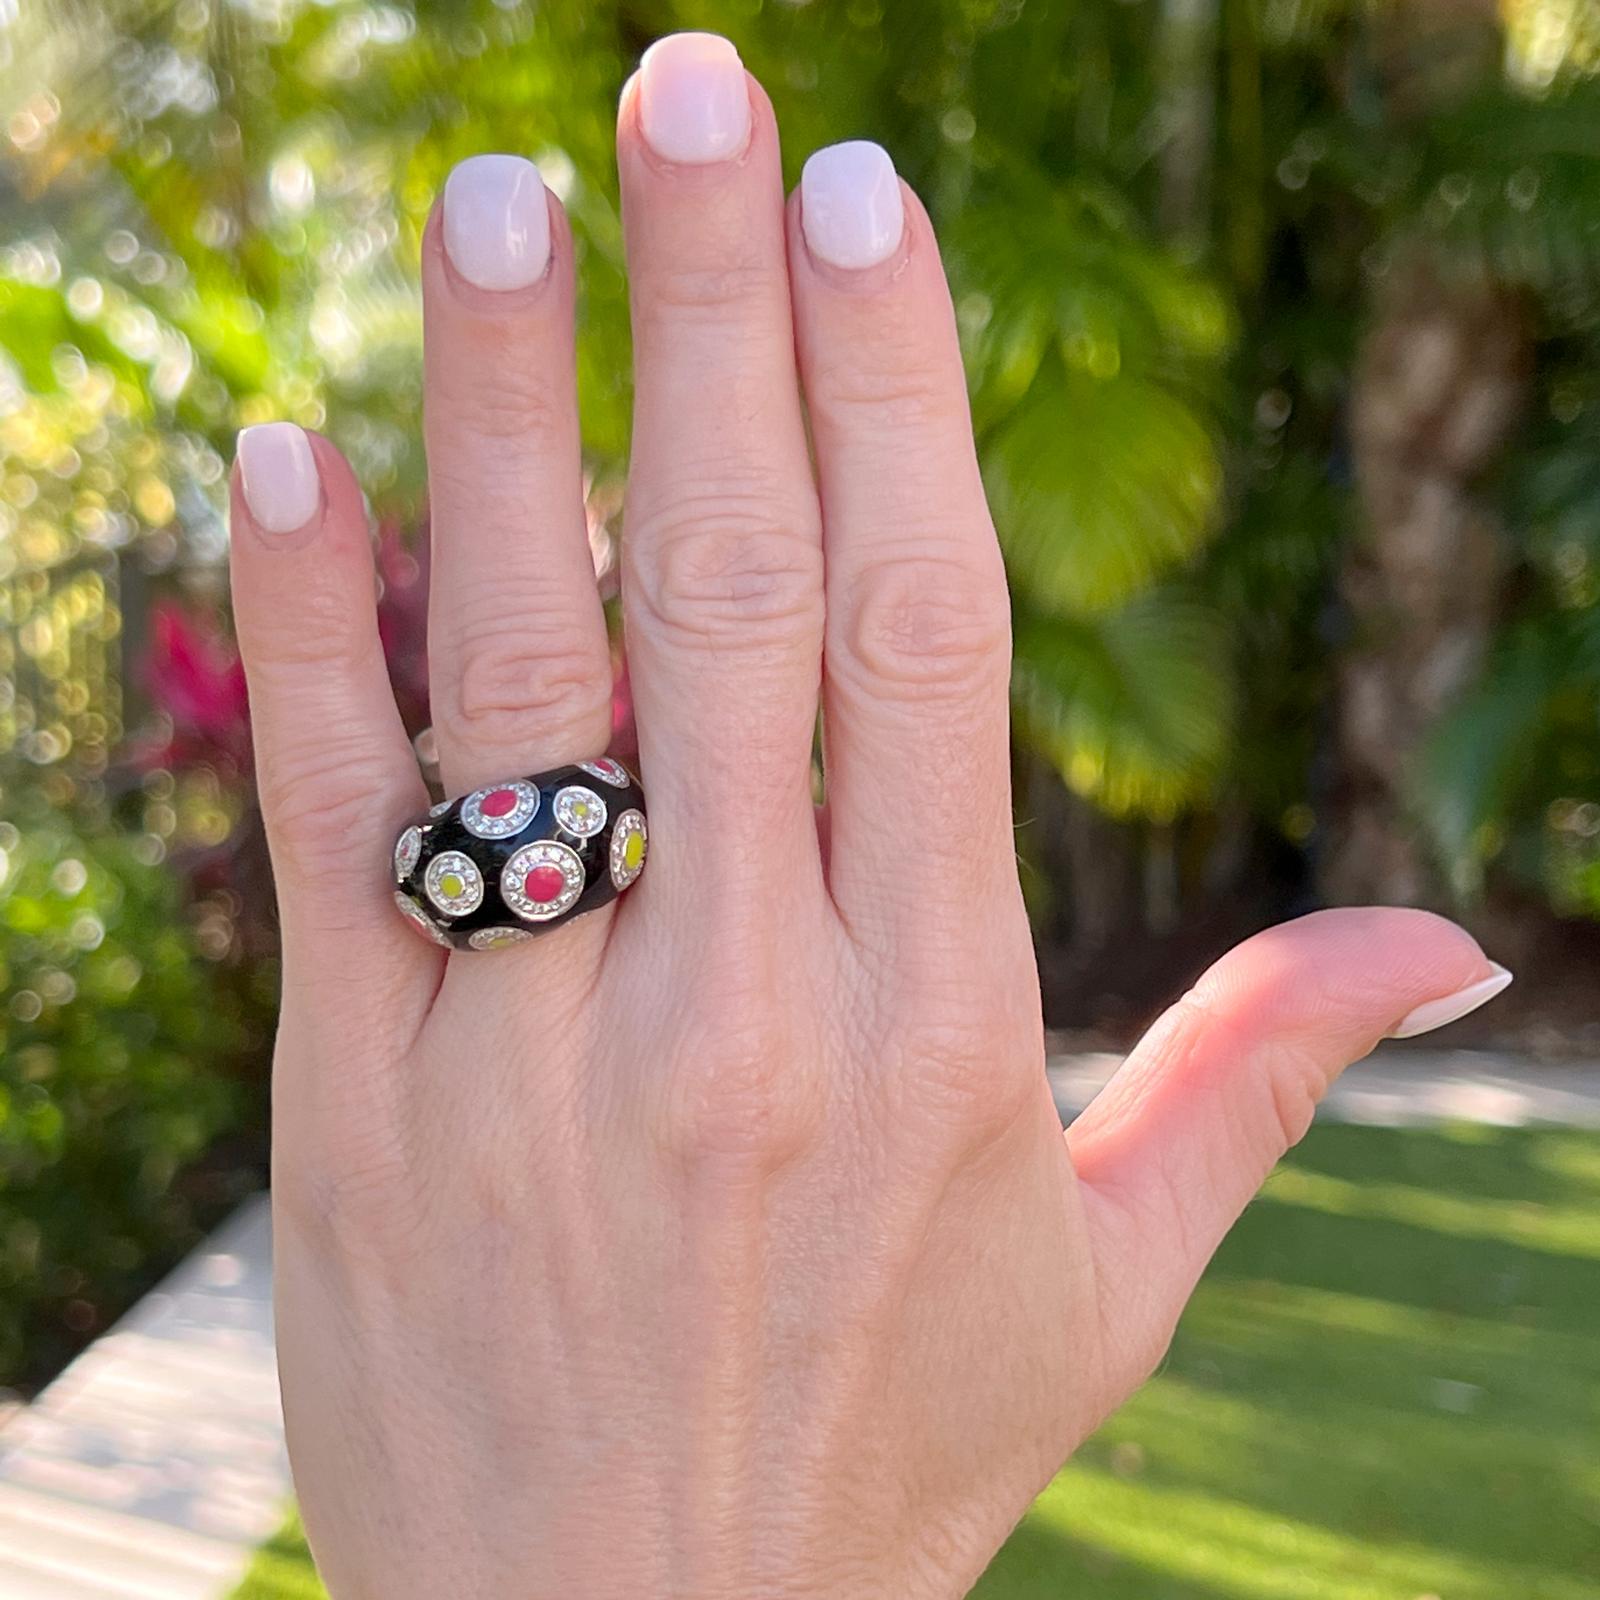 Diamond and enamel band ring fashioned in 18 karat white gold. The ring features a black enamel background with diamond pink and lime green colorful dot design. The diamonds weigh approximately 1.00 CTW and are graded G-H color and SI clarity. The